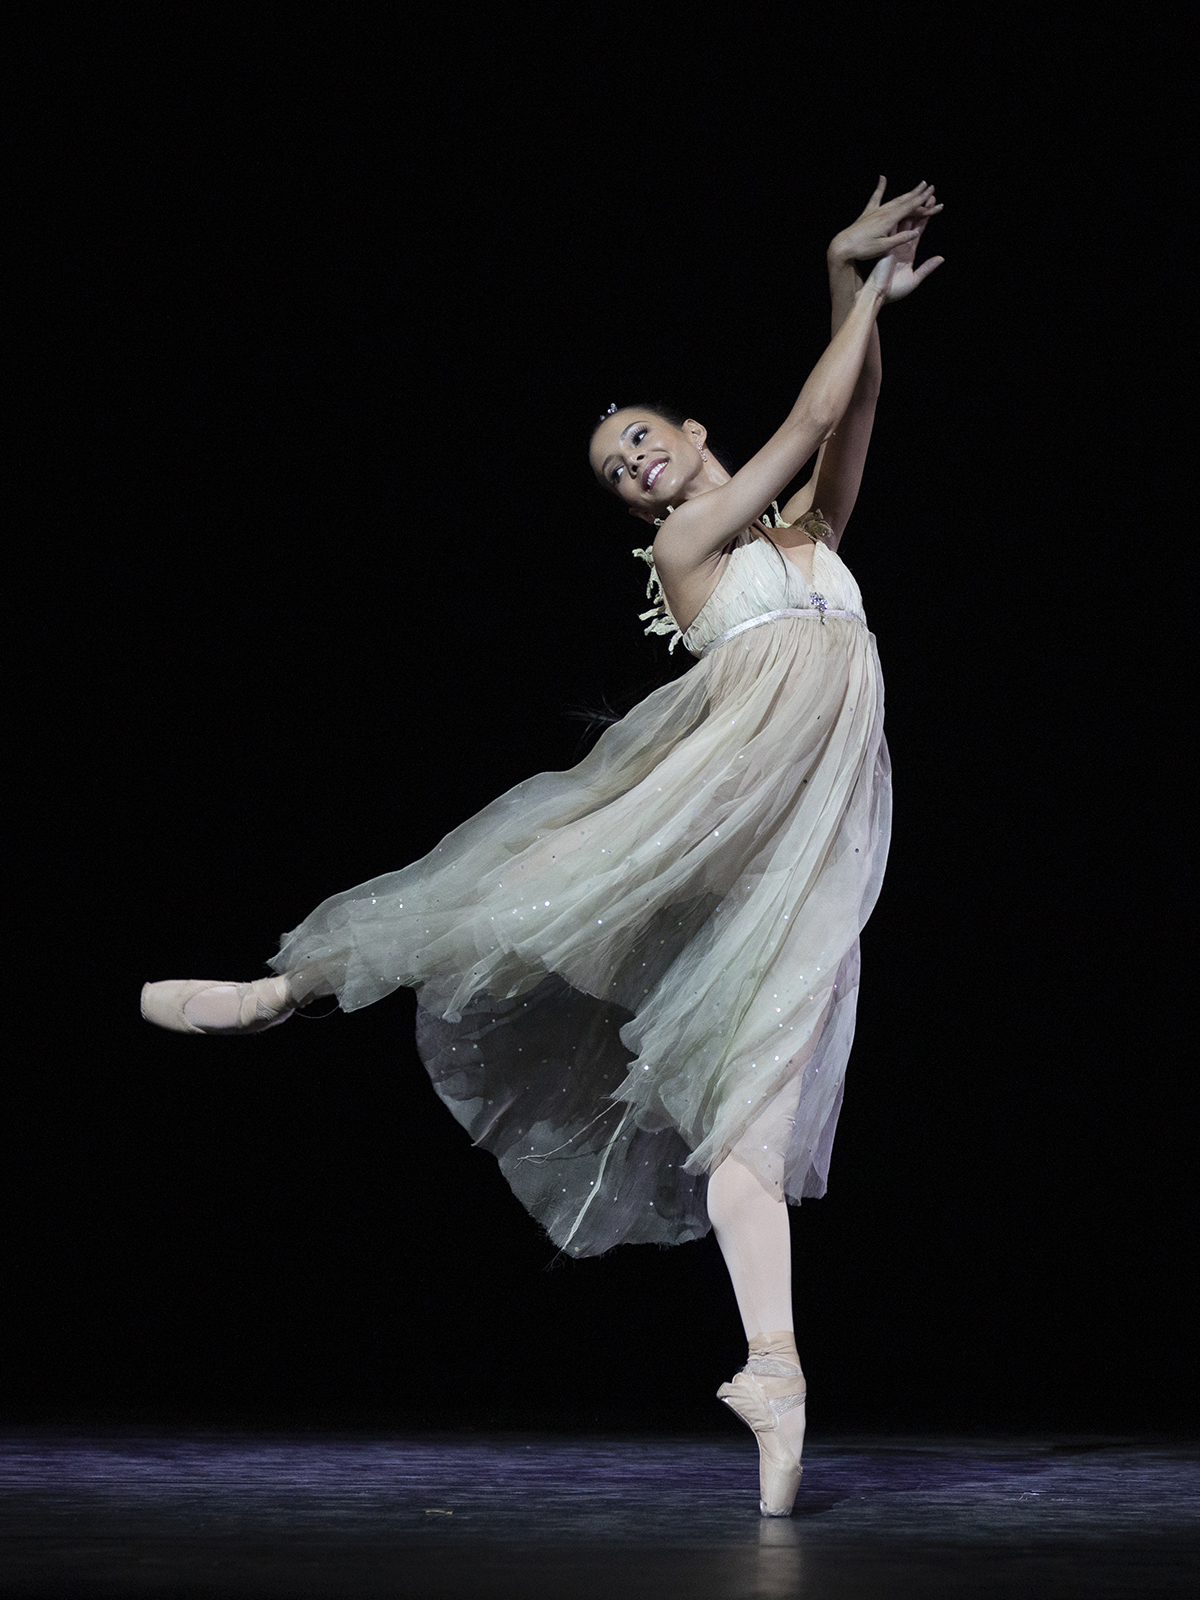 A woman dancing on a stage a flowing white dress